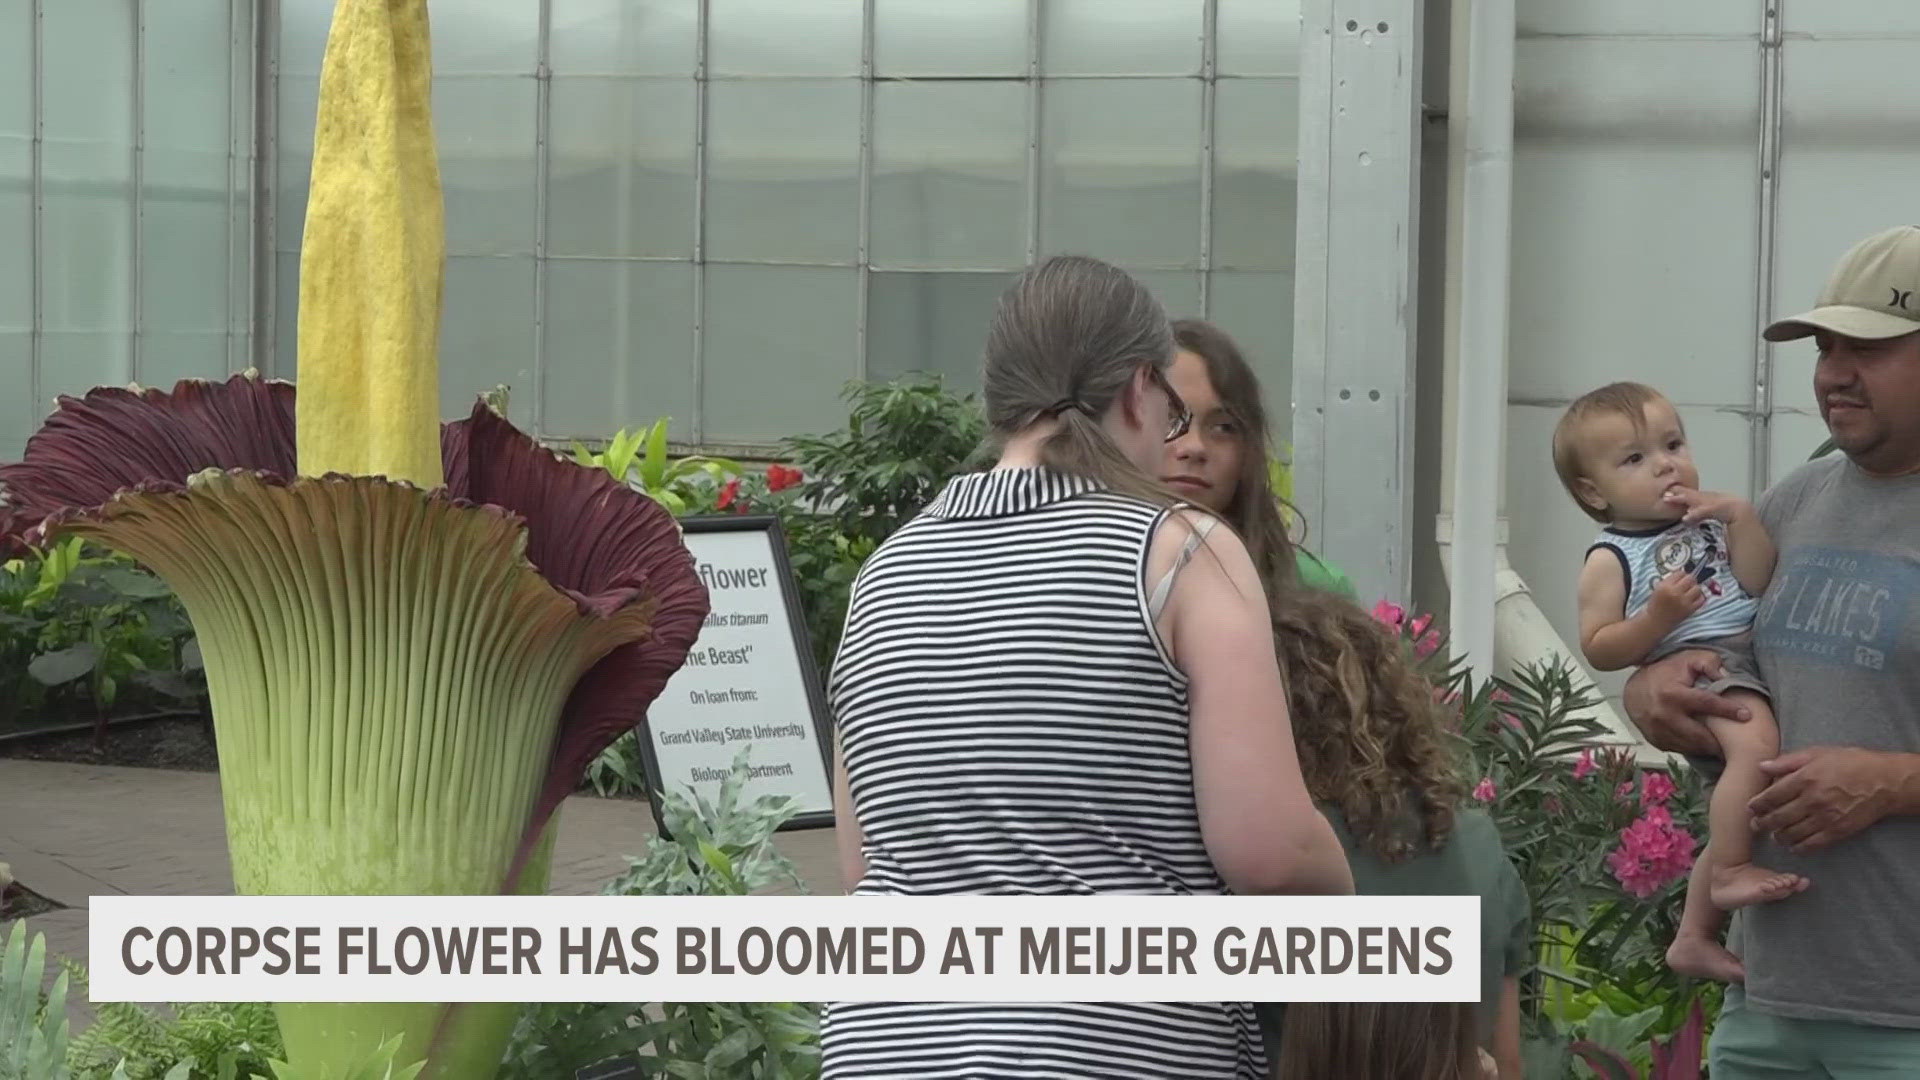 People are lining up to see the rare corpse flower in bloom at Meijer Gardens. If you'd like to see it, you'd better hurry.